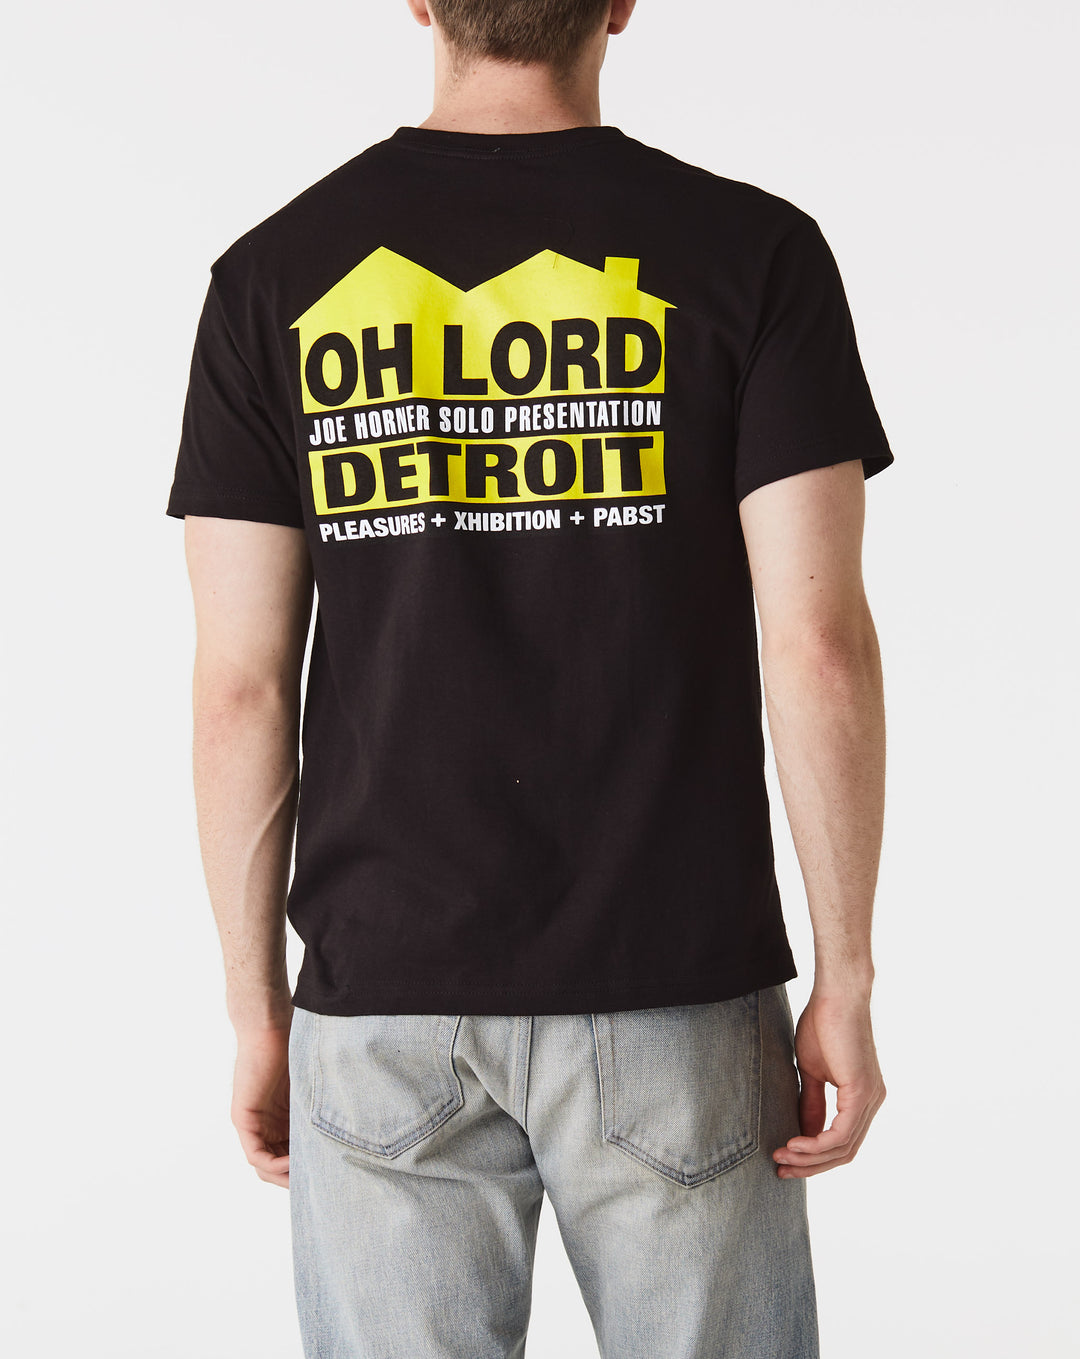 Joe Horner 'Oh Lord' House Sign T-Shirt  - XHIBITION